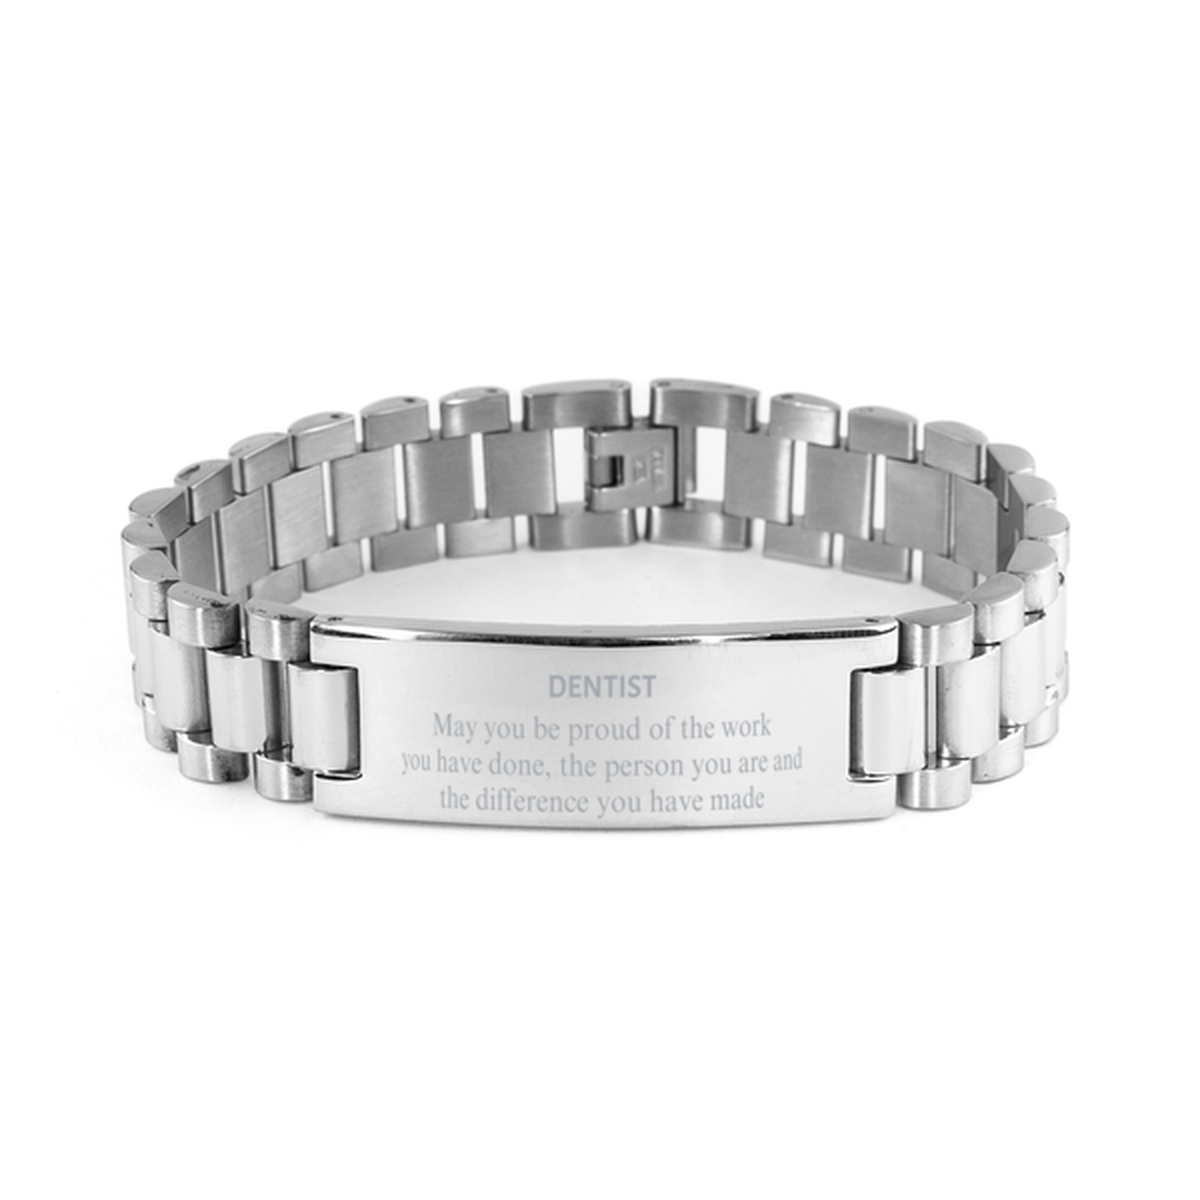 Dentist May you be proud of the work you have done, Retirement Dentist Ladder Stainless Steel Bracelet for Colleague Appreciation Gifts Amazing for Dentist